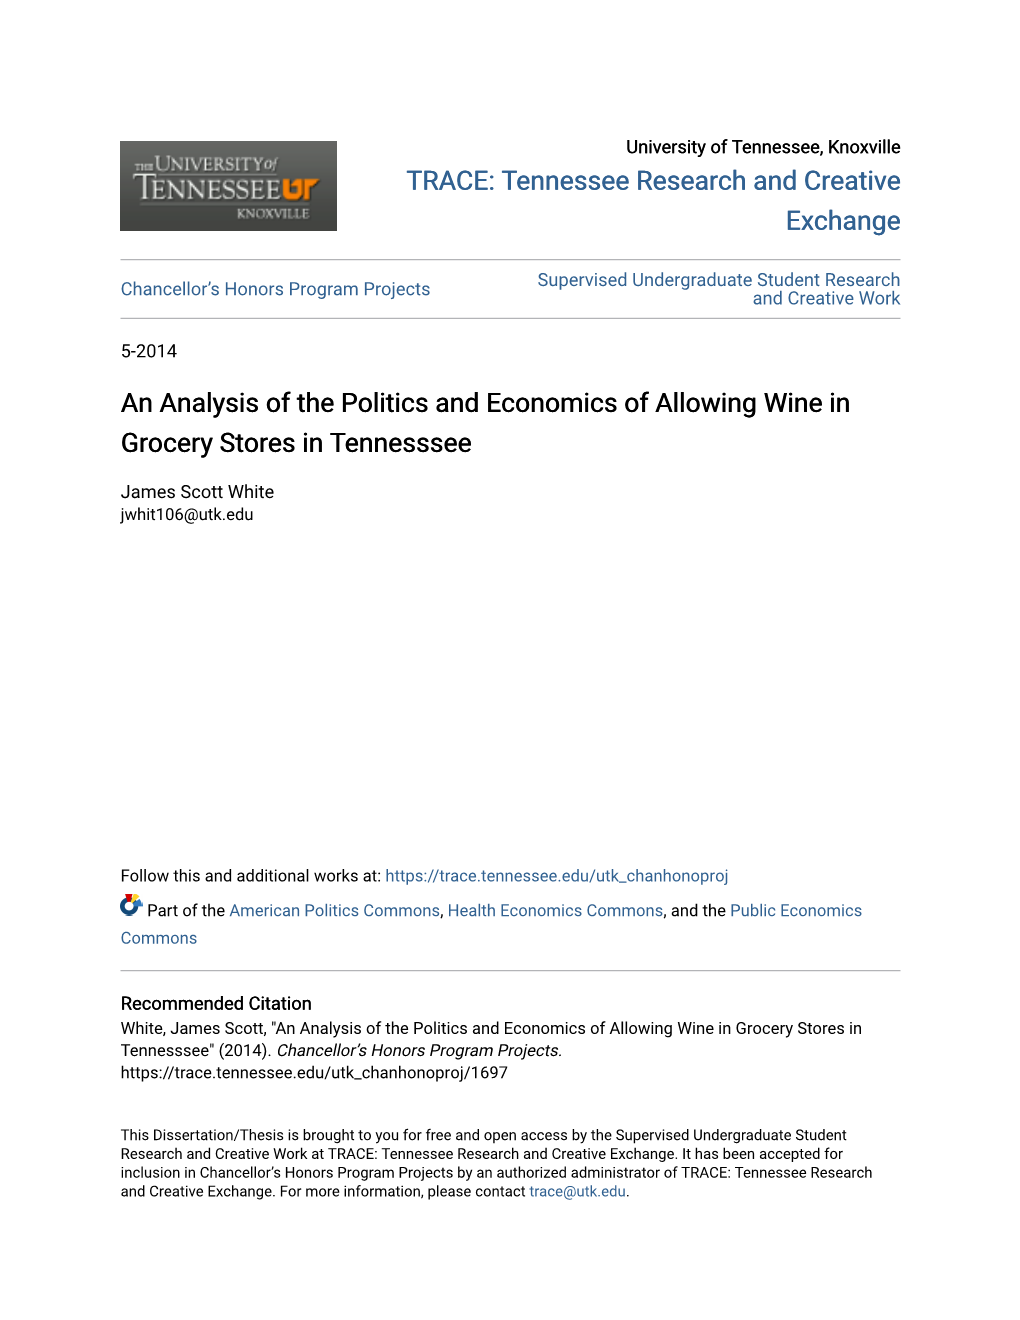 An Analysis of the Politics and Economics of Allowing Wine in Grocery Stores in Tennesssee